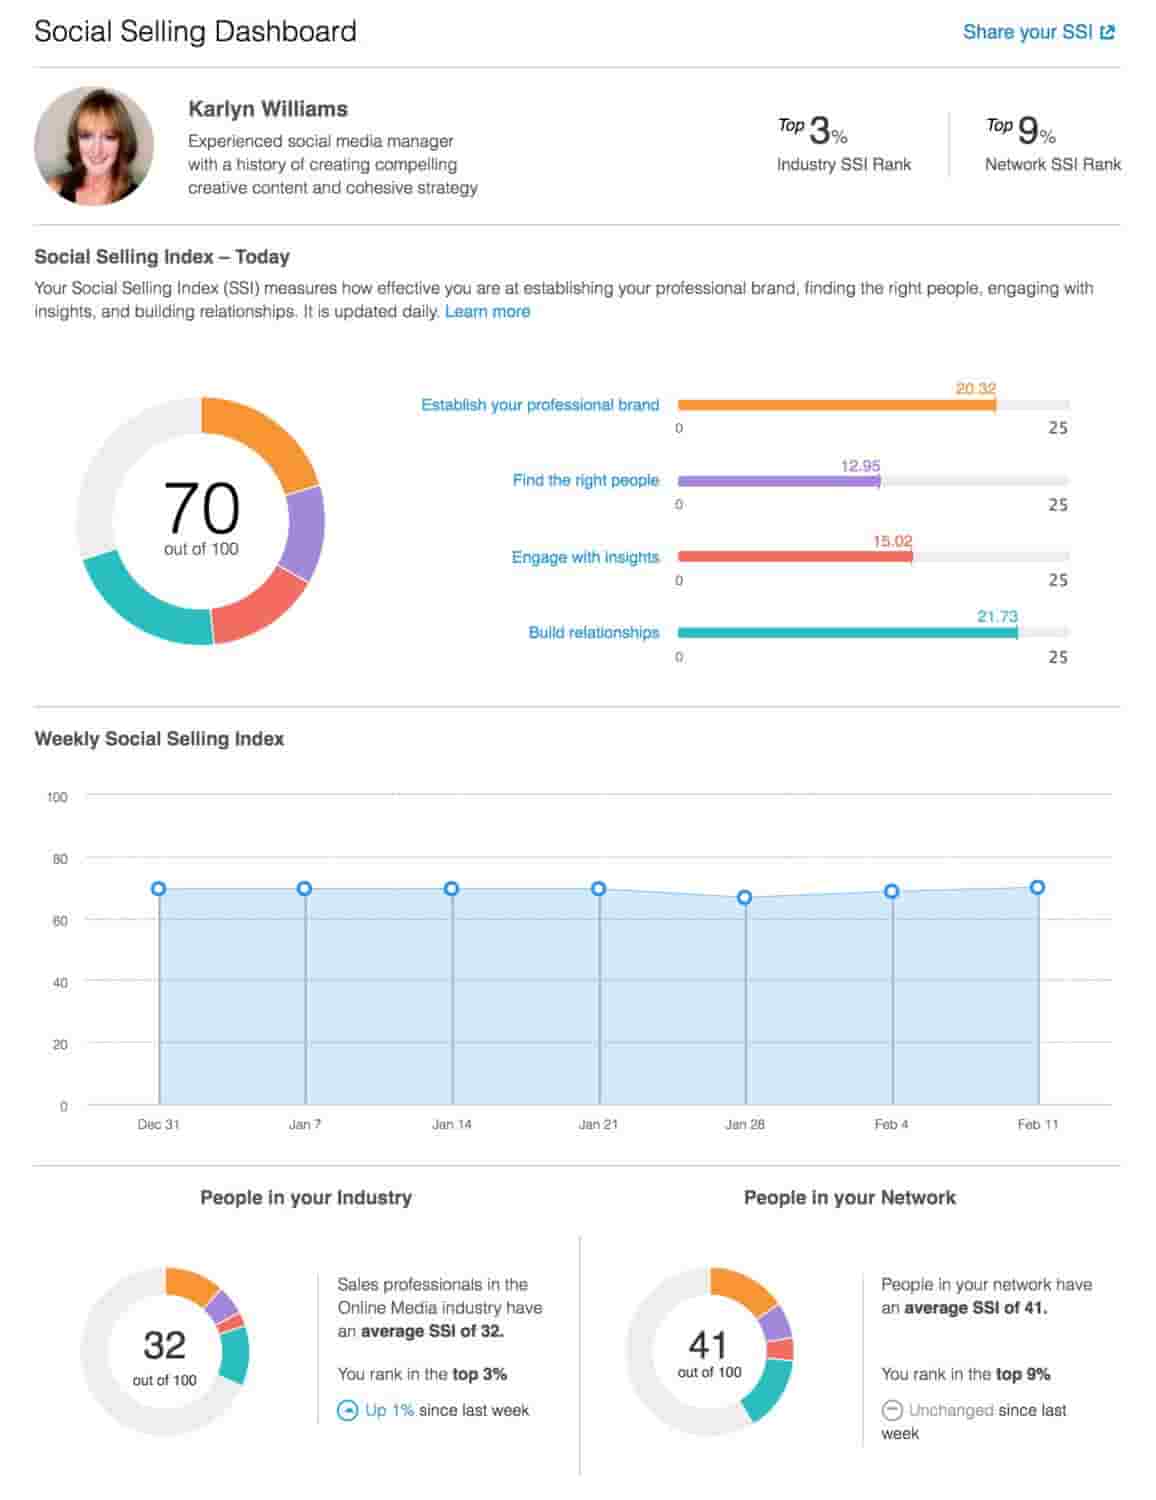 Social selling dashboard from LinkedIn